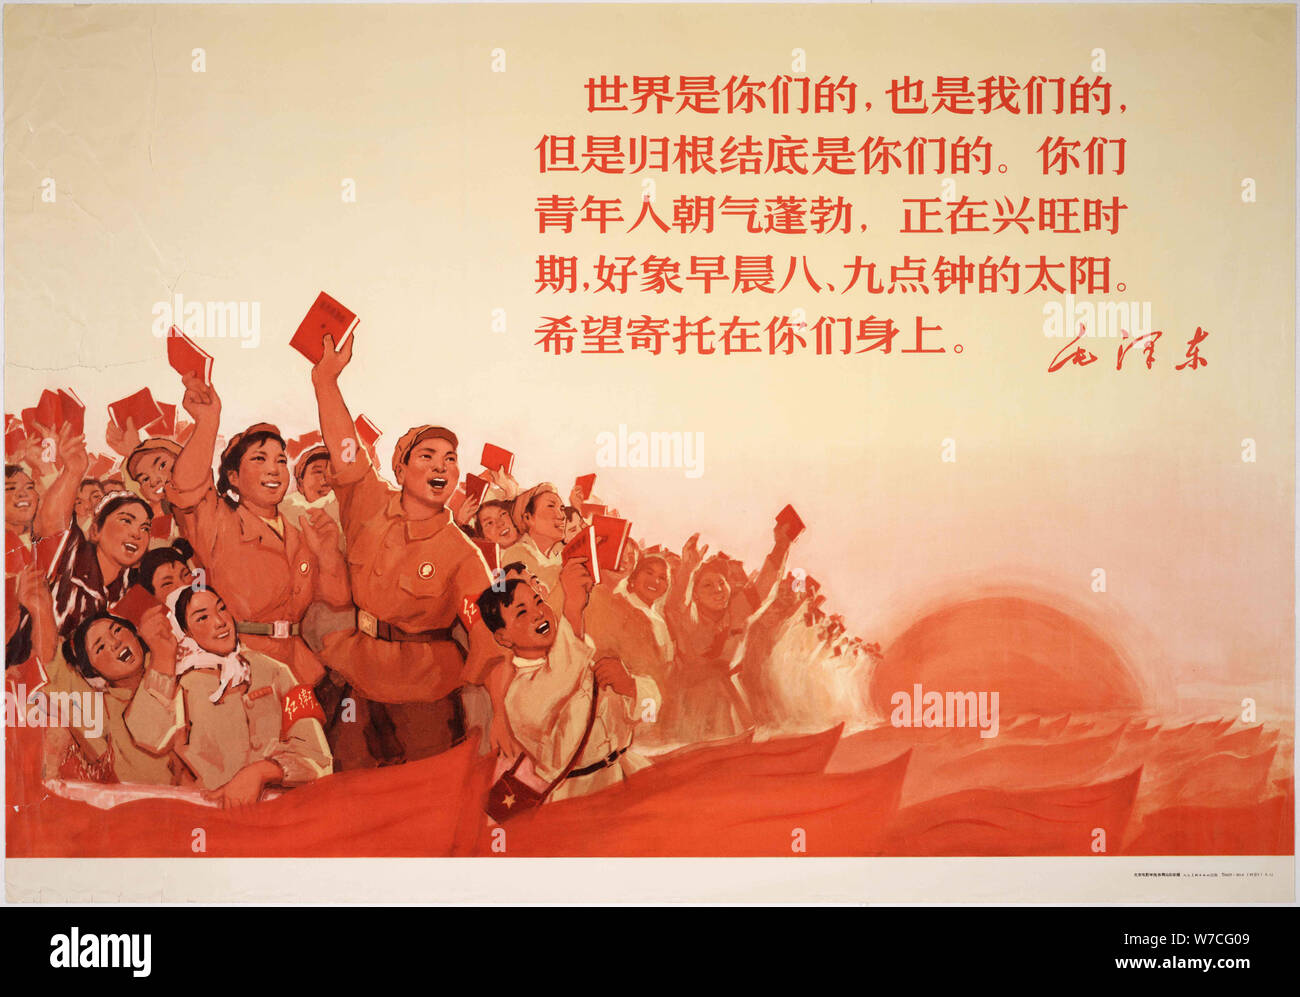 Mao Zedong: The world is yours, as well as ours, 1967. Stock Photo